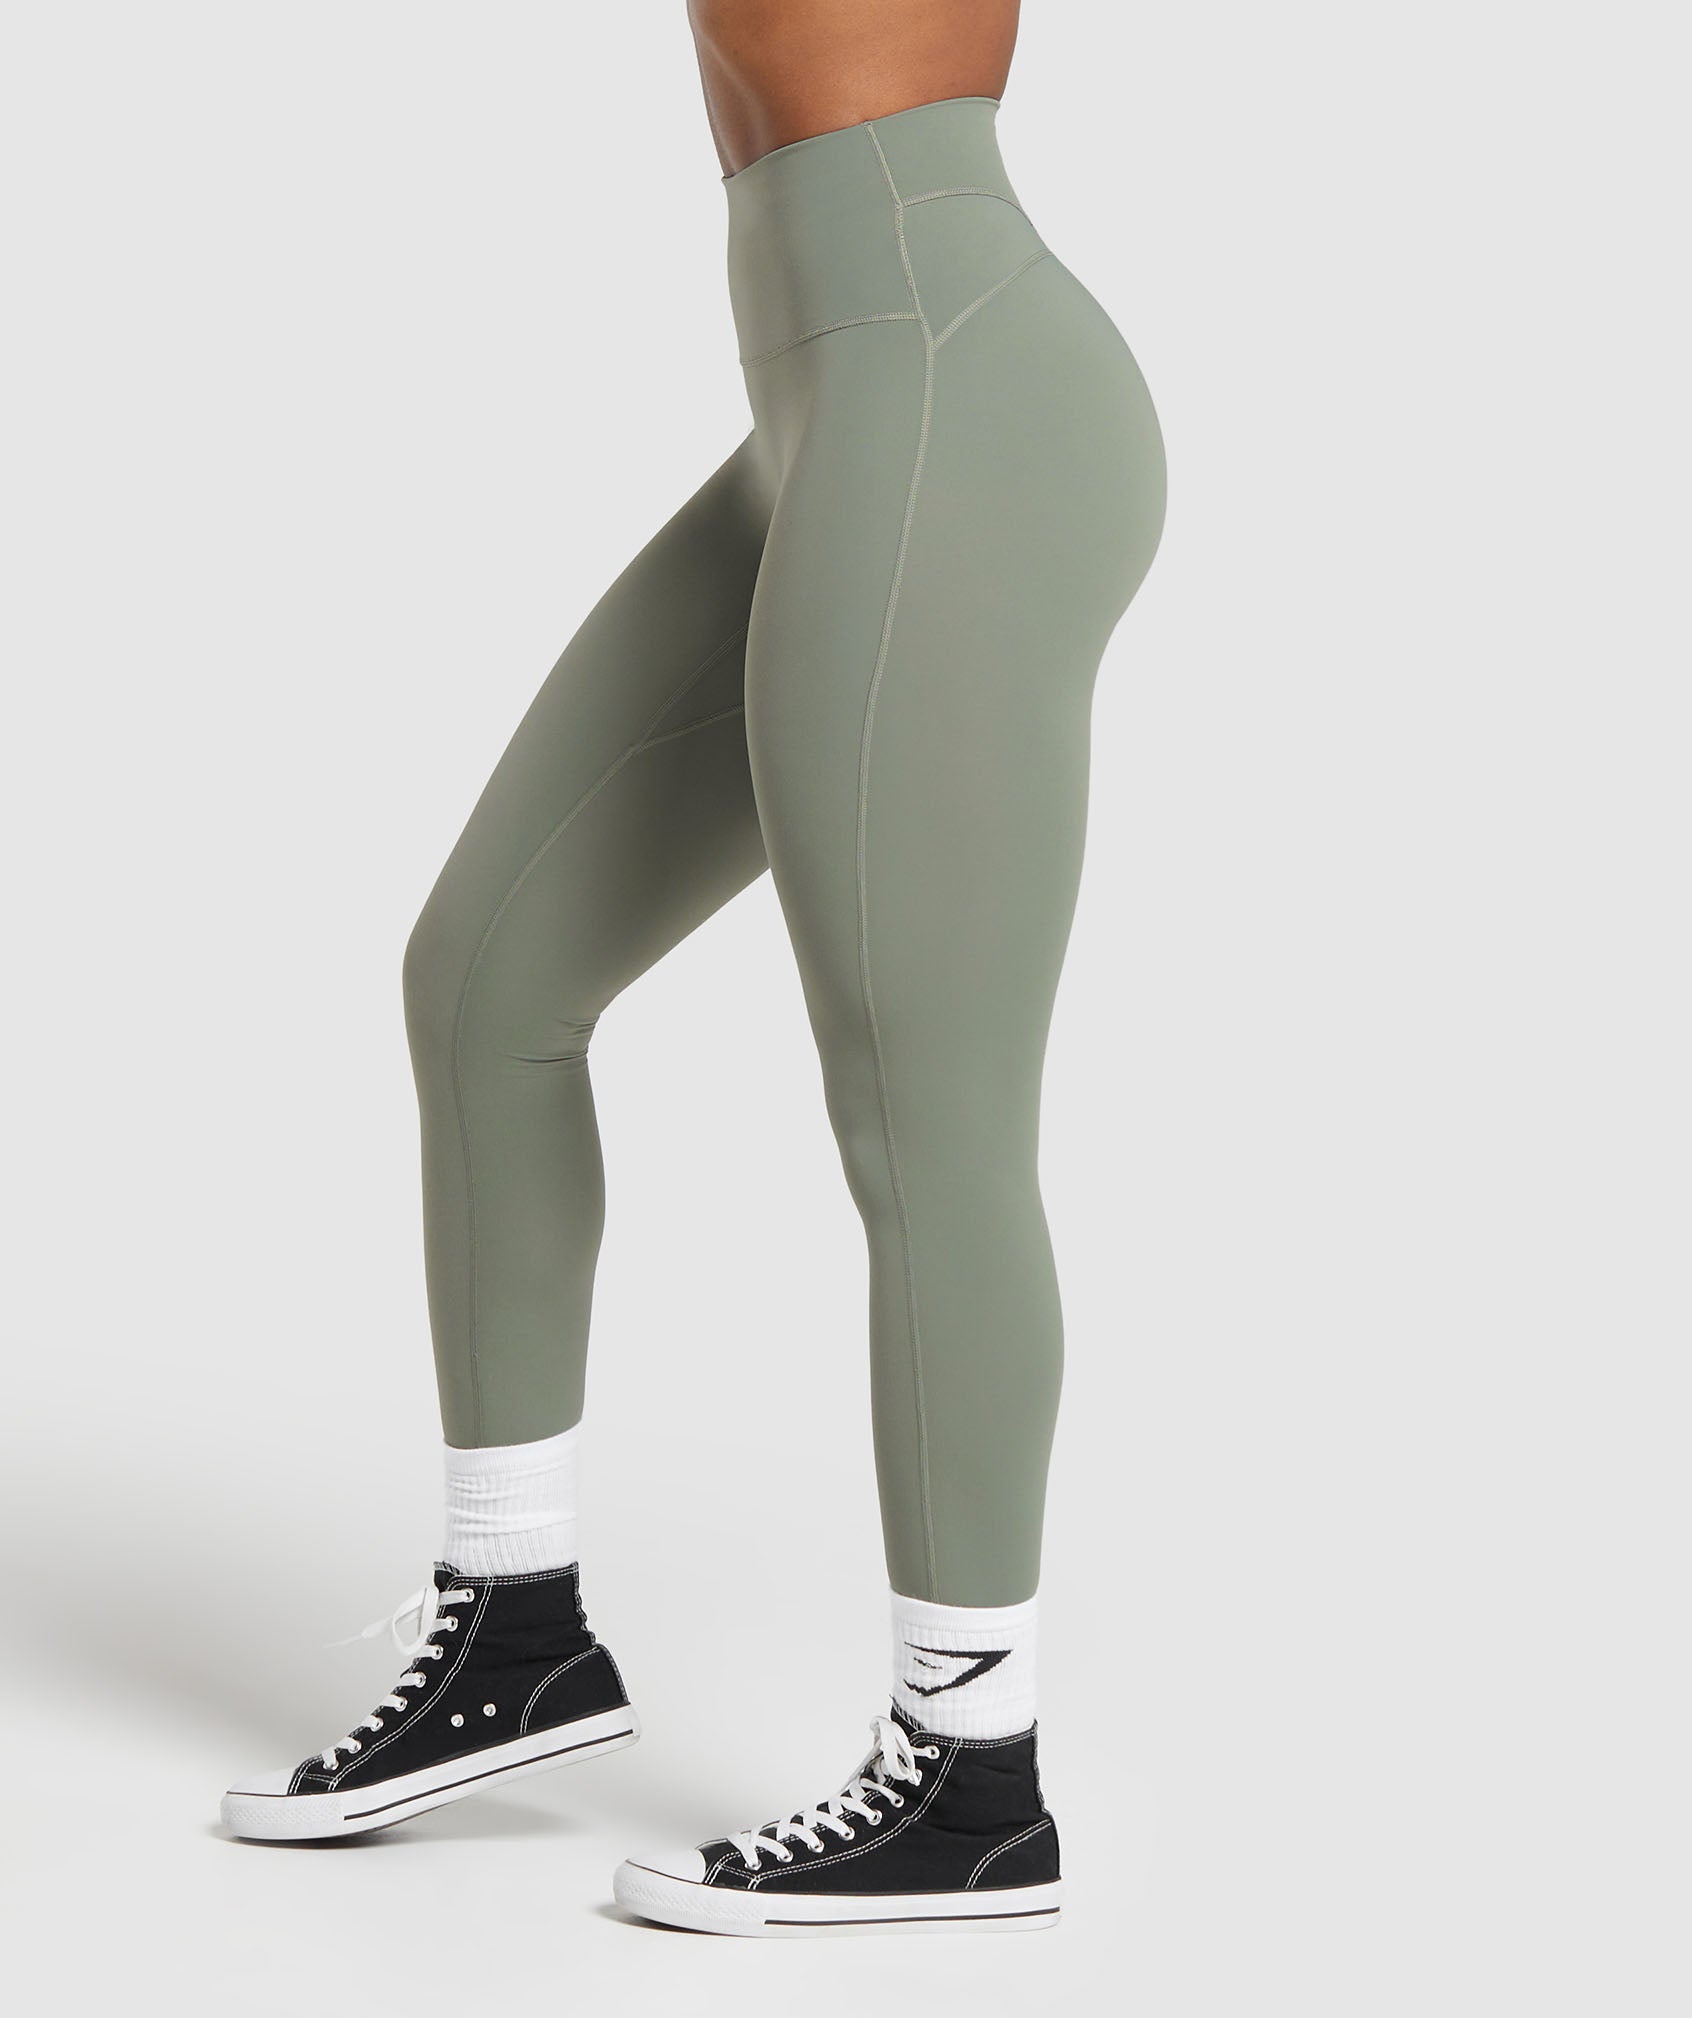 Legacy Tall Leggings in Unit Green - view 3